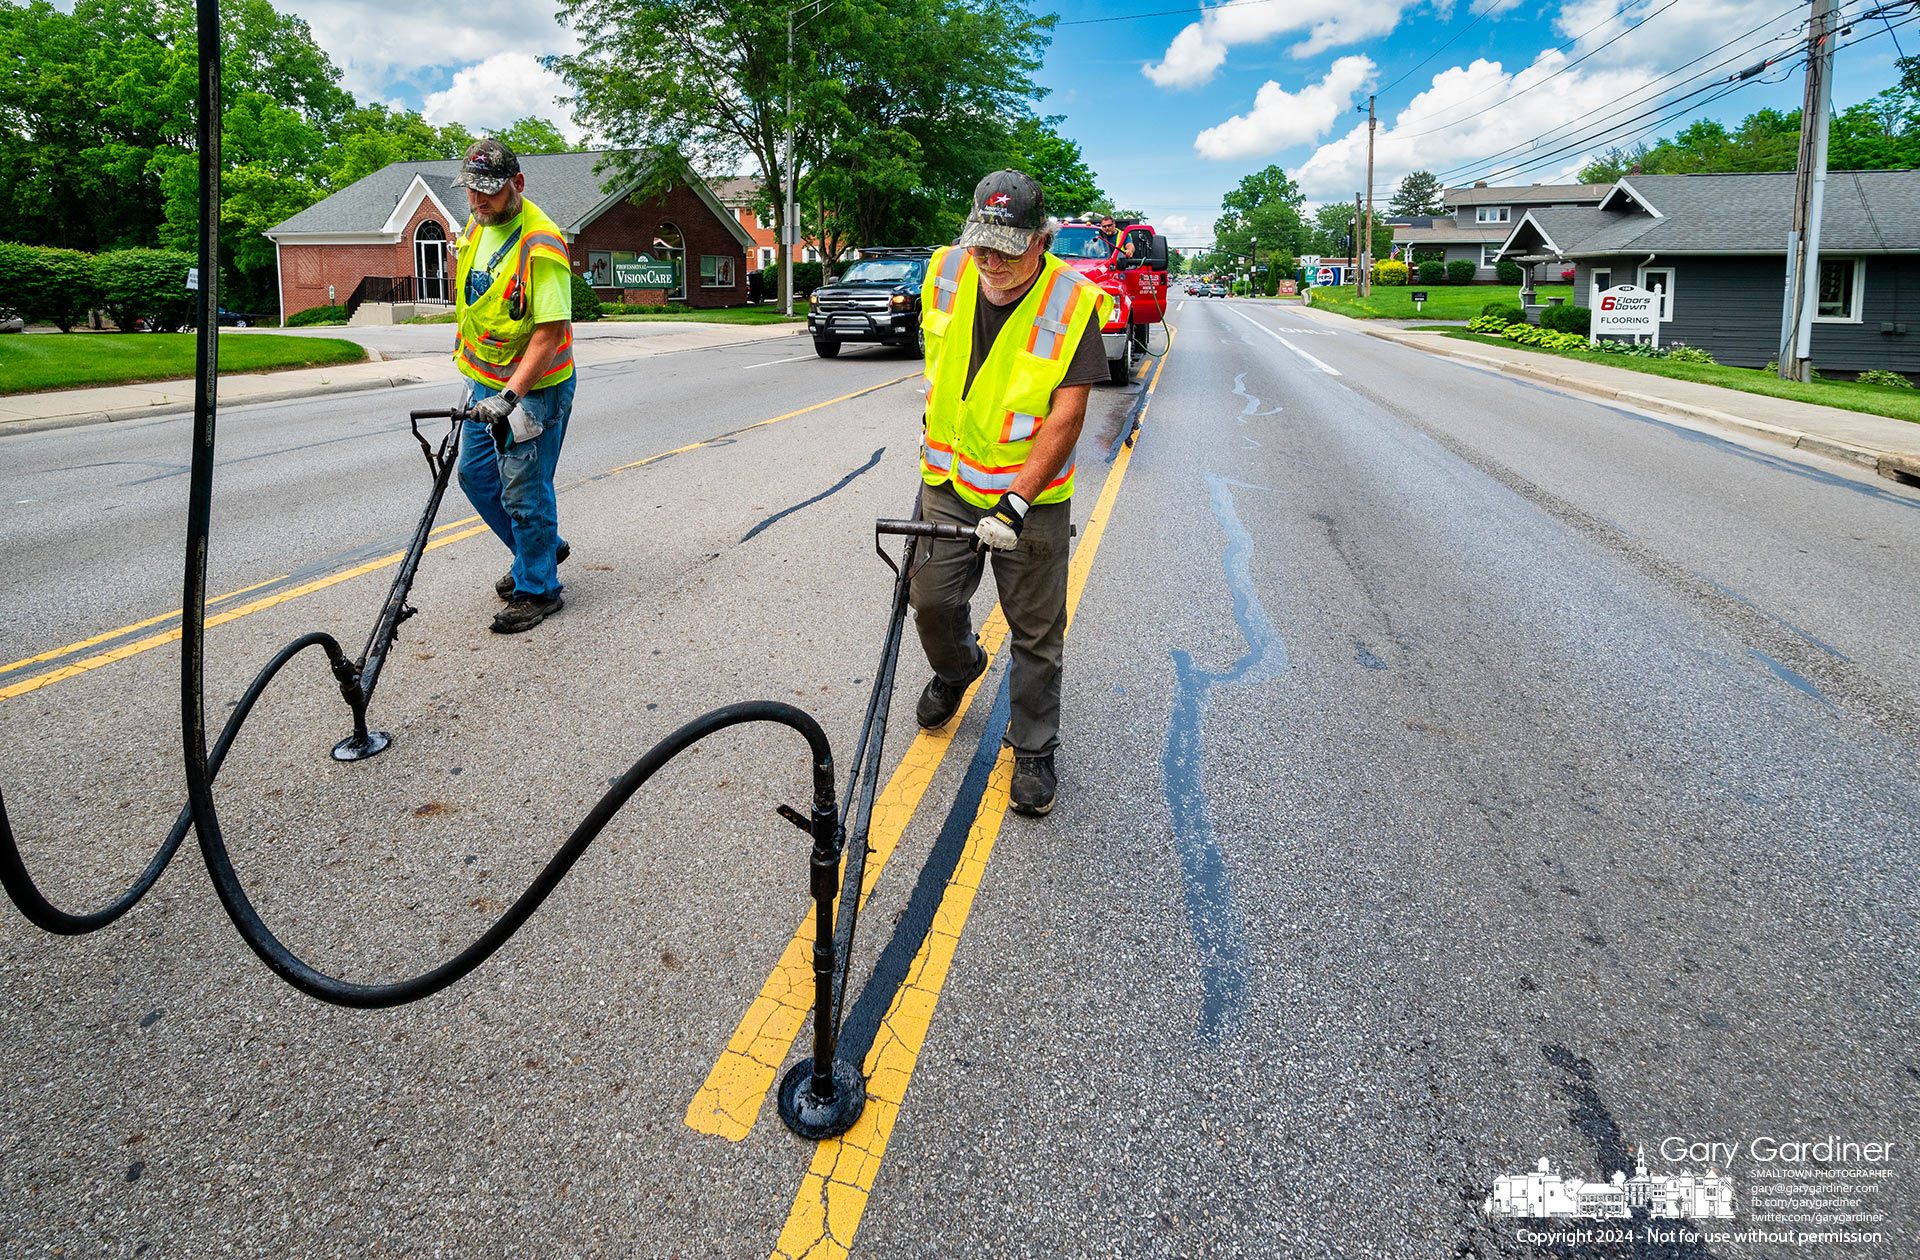 Workers apply a hot tar mixture to cracks in the asphalt on South State Street as part of a maintenance program to prevent further cracking and erosion of the heavily traveled road. My Final Photo for June 3, 2024.